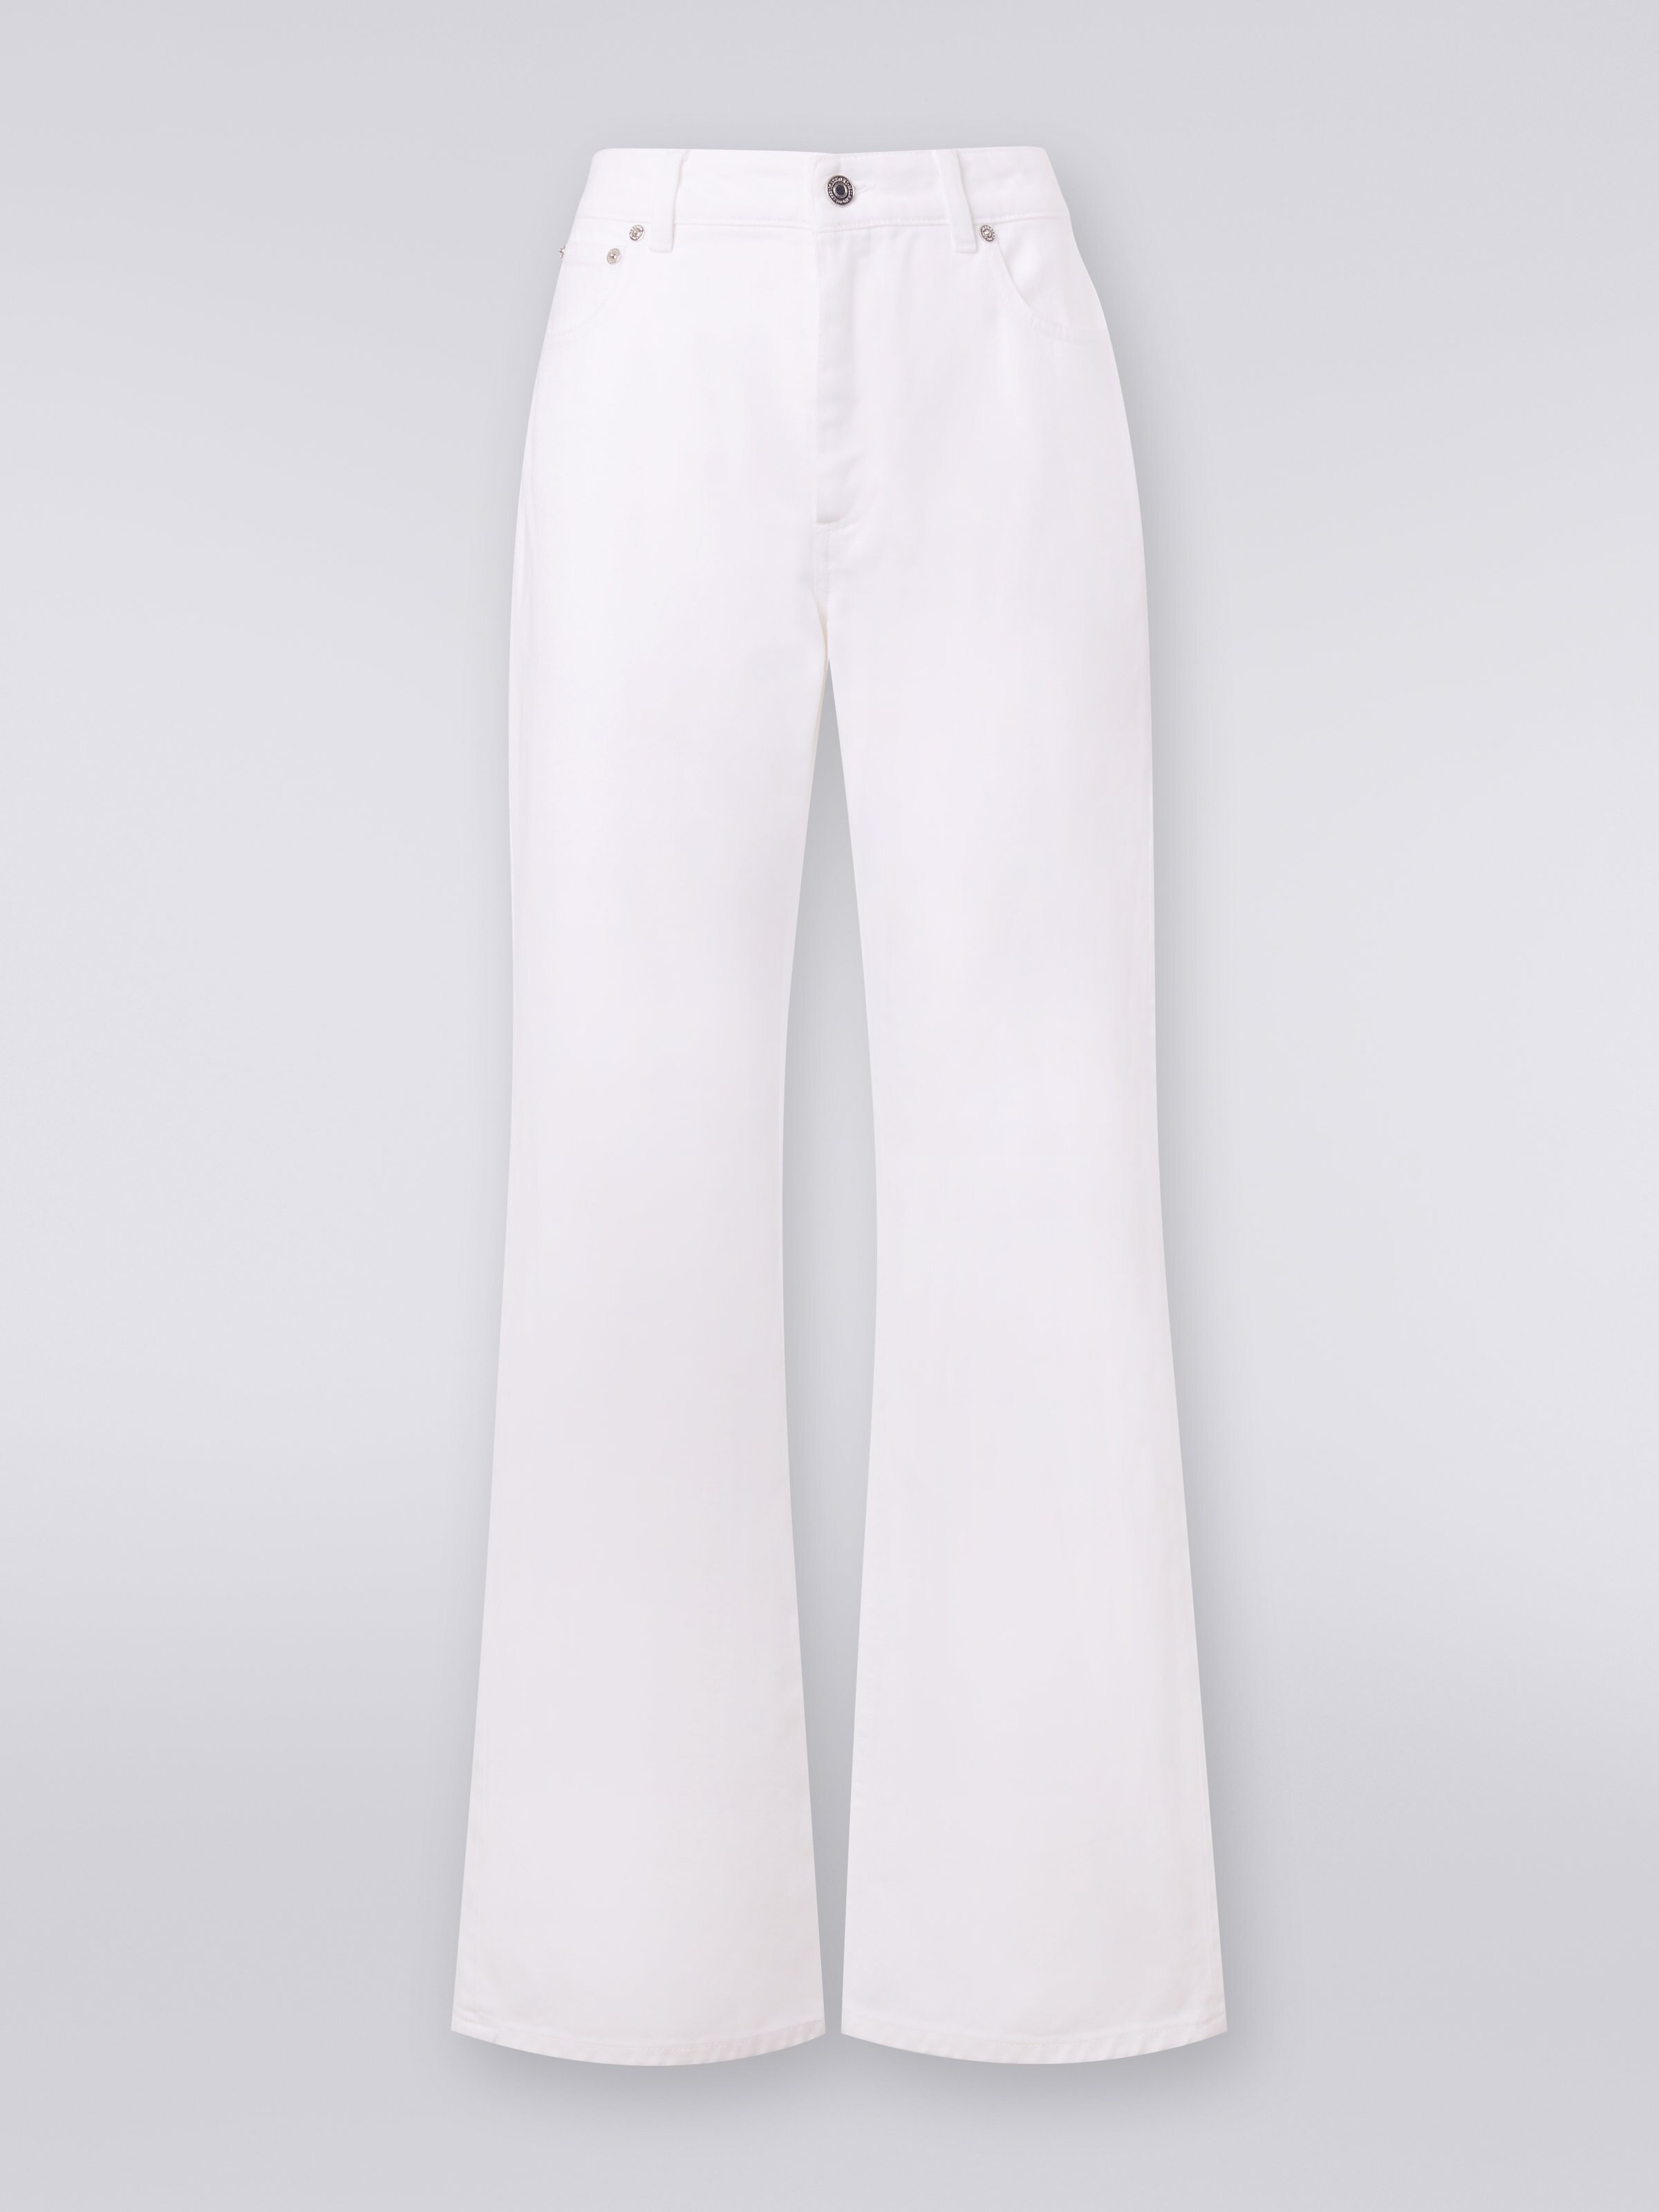 Five-pocket palazzo trousers with zigzag embroidery on the back pocket  , White  - 0